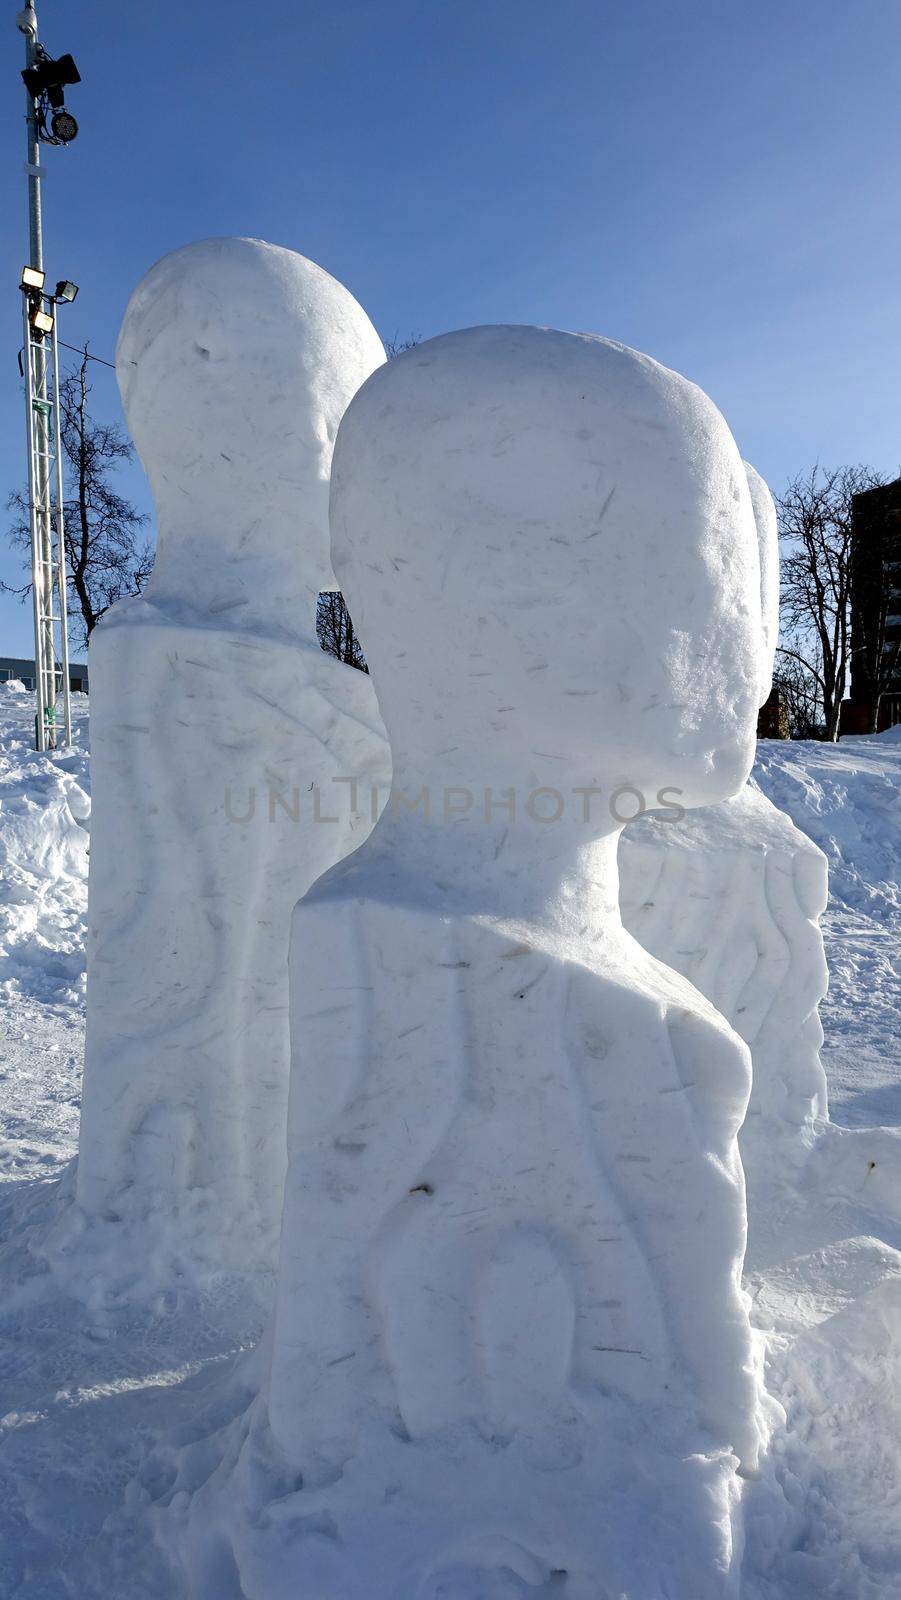 Kiruna, Sweden, February 23, 2020. Art, ice sculptures in a square in the snowy center of Kiruna in northern Sweden during the winter